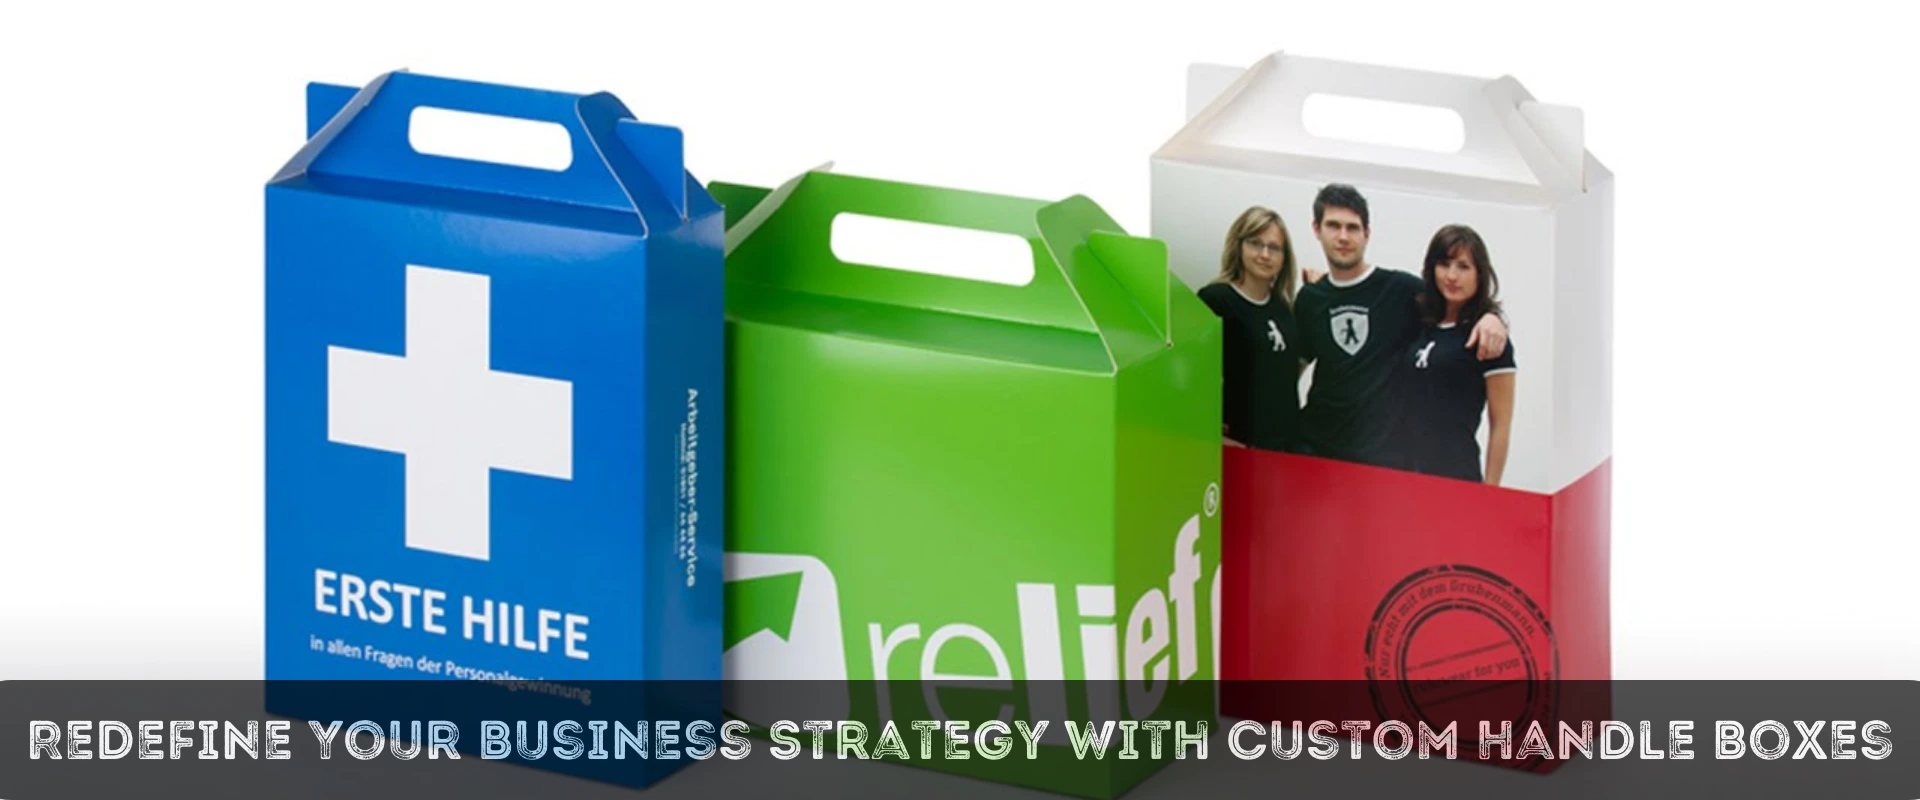 Redefine Your Business Strategy With Custom Handle Boxes